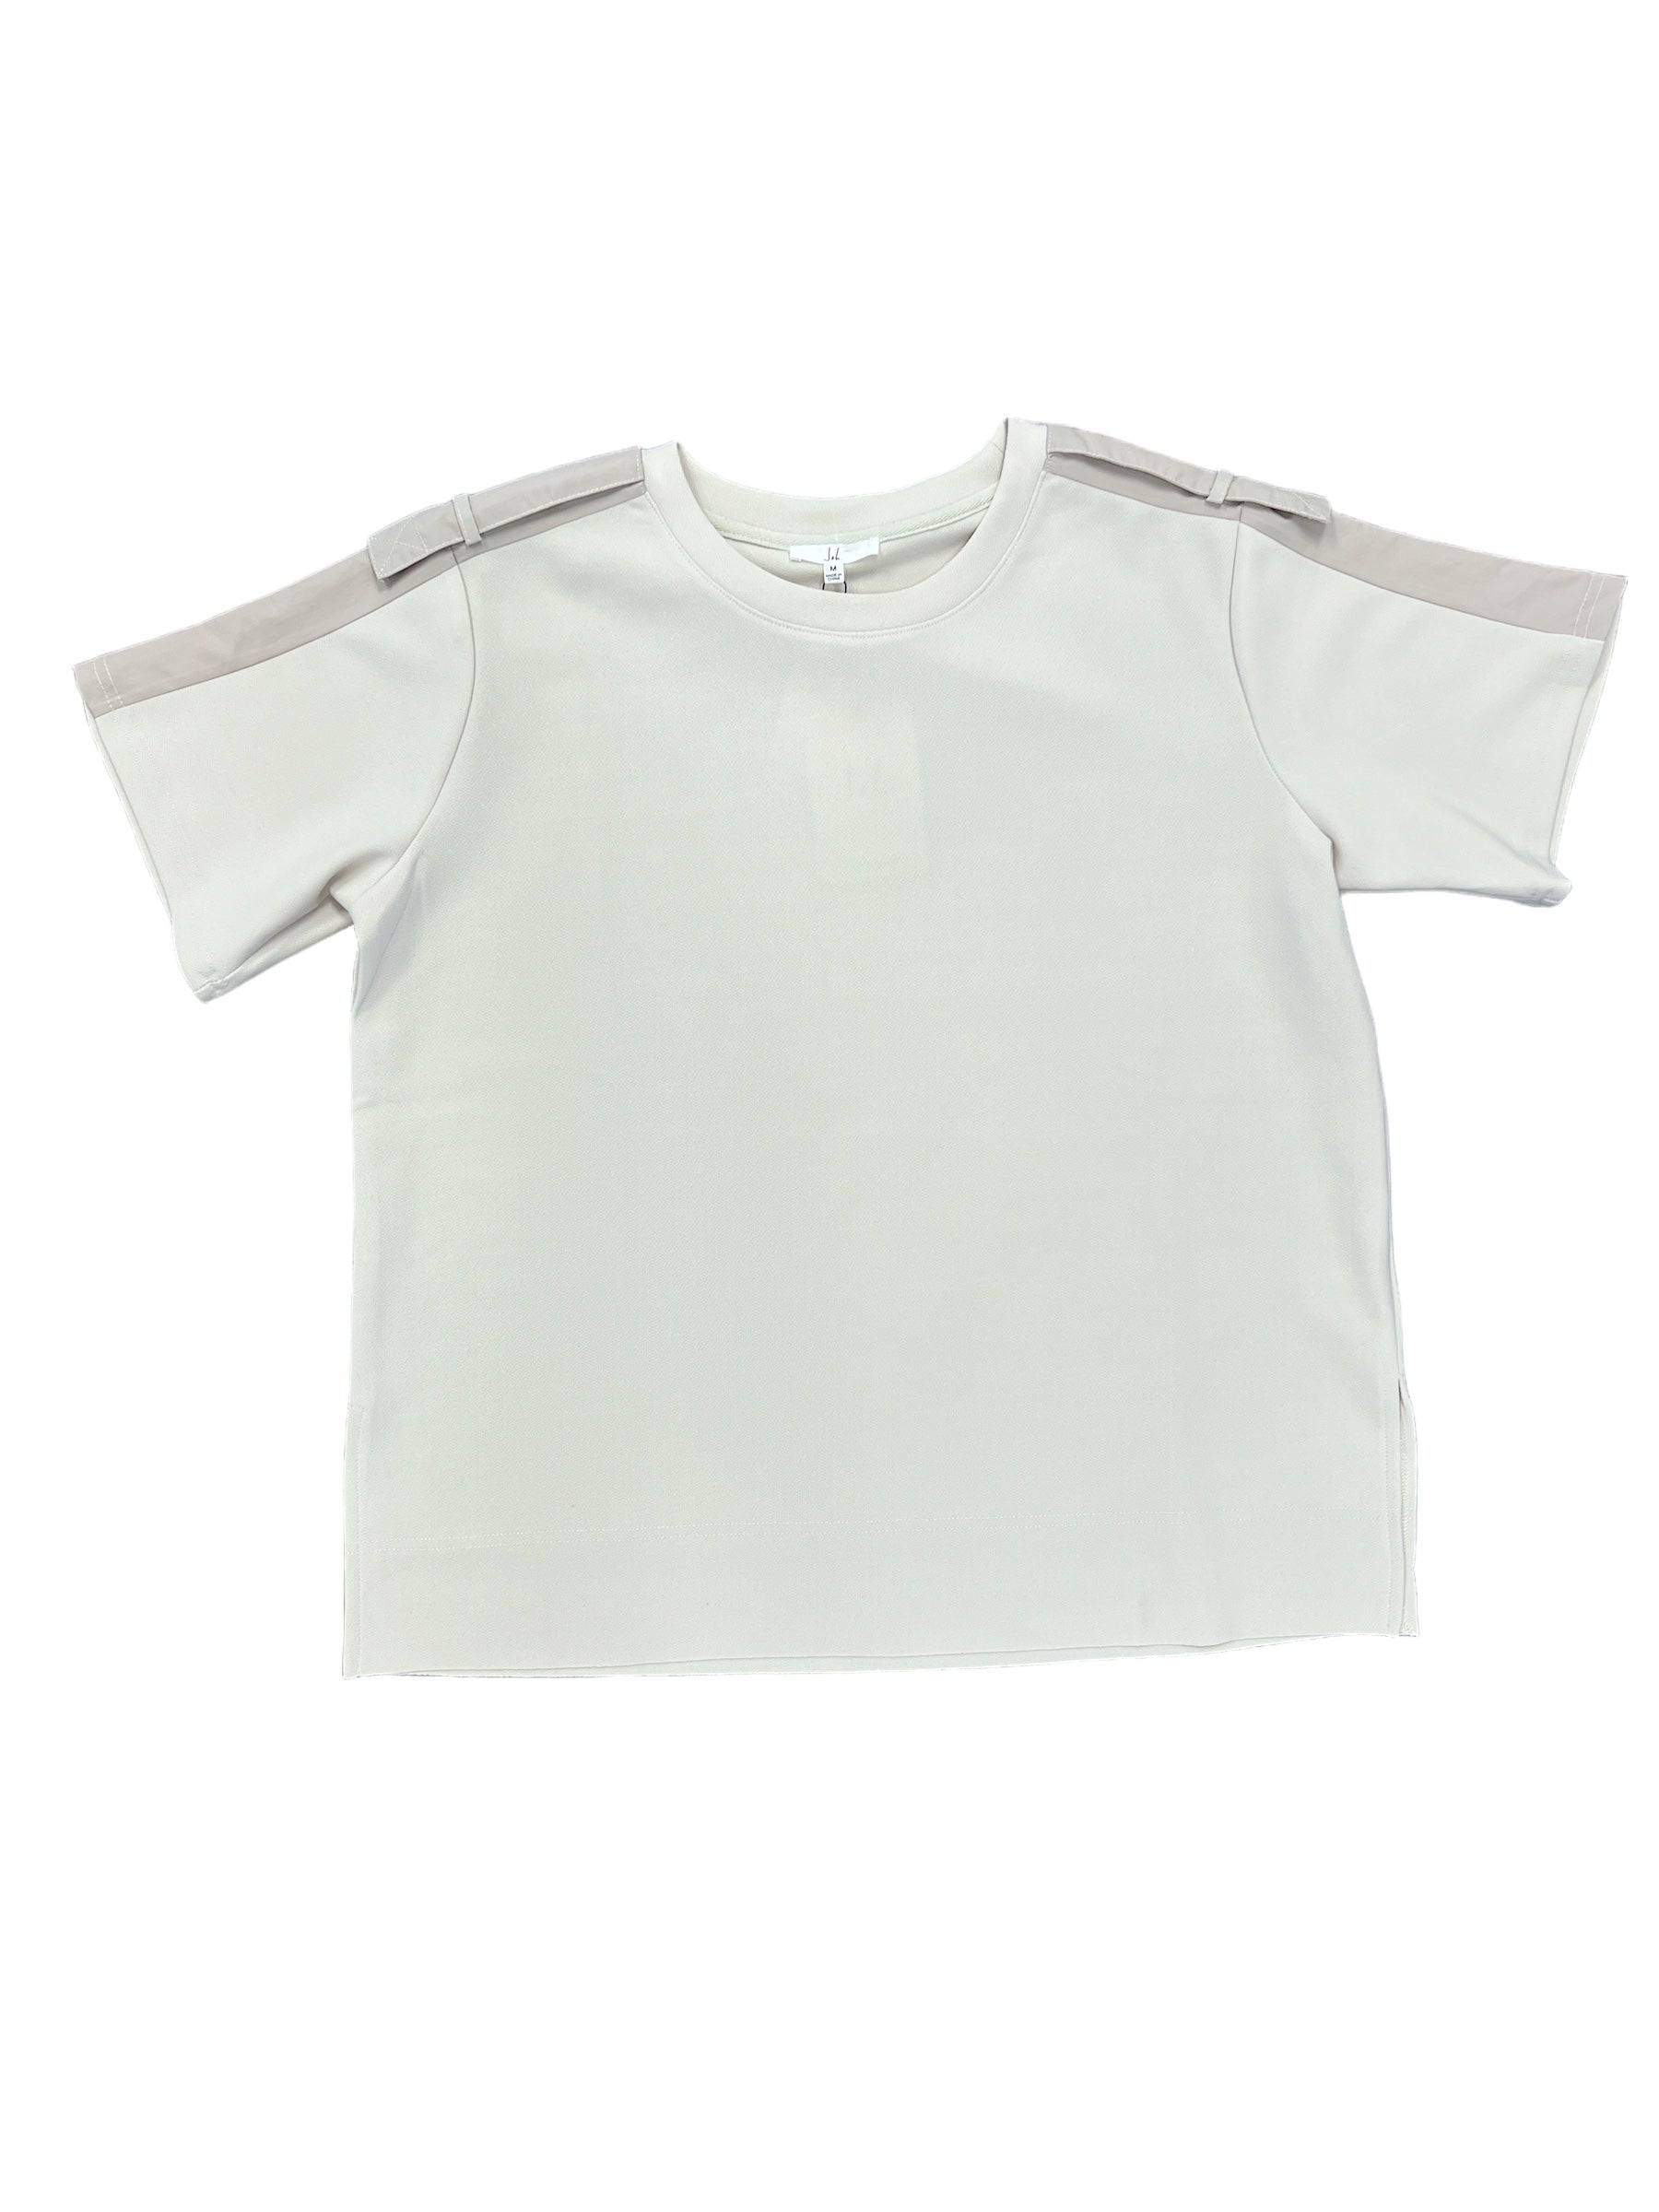 Kate Crepe Top-130 Dressy Tops & Blouses-joh-Simply Stylish Boutique | Women’s & Kid’s Fashion | Paducah, KY